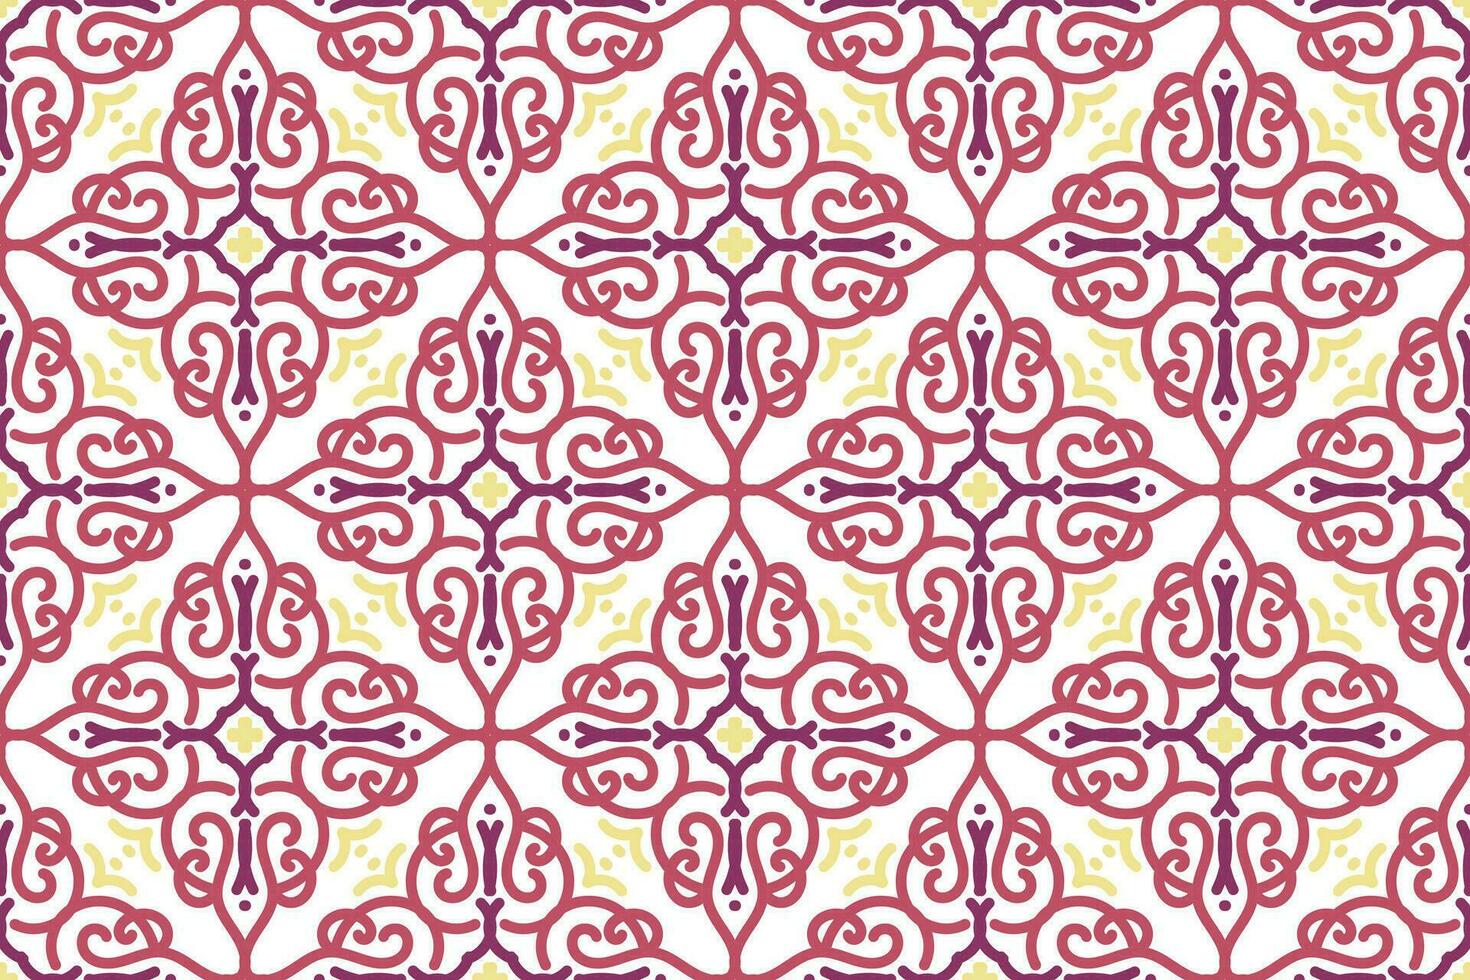 oriental pattern. White and purple background with Arabic ornaments. Pattern, background and wallpaper for your design. Textile ornament. Vector illustration.